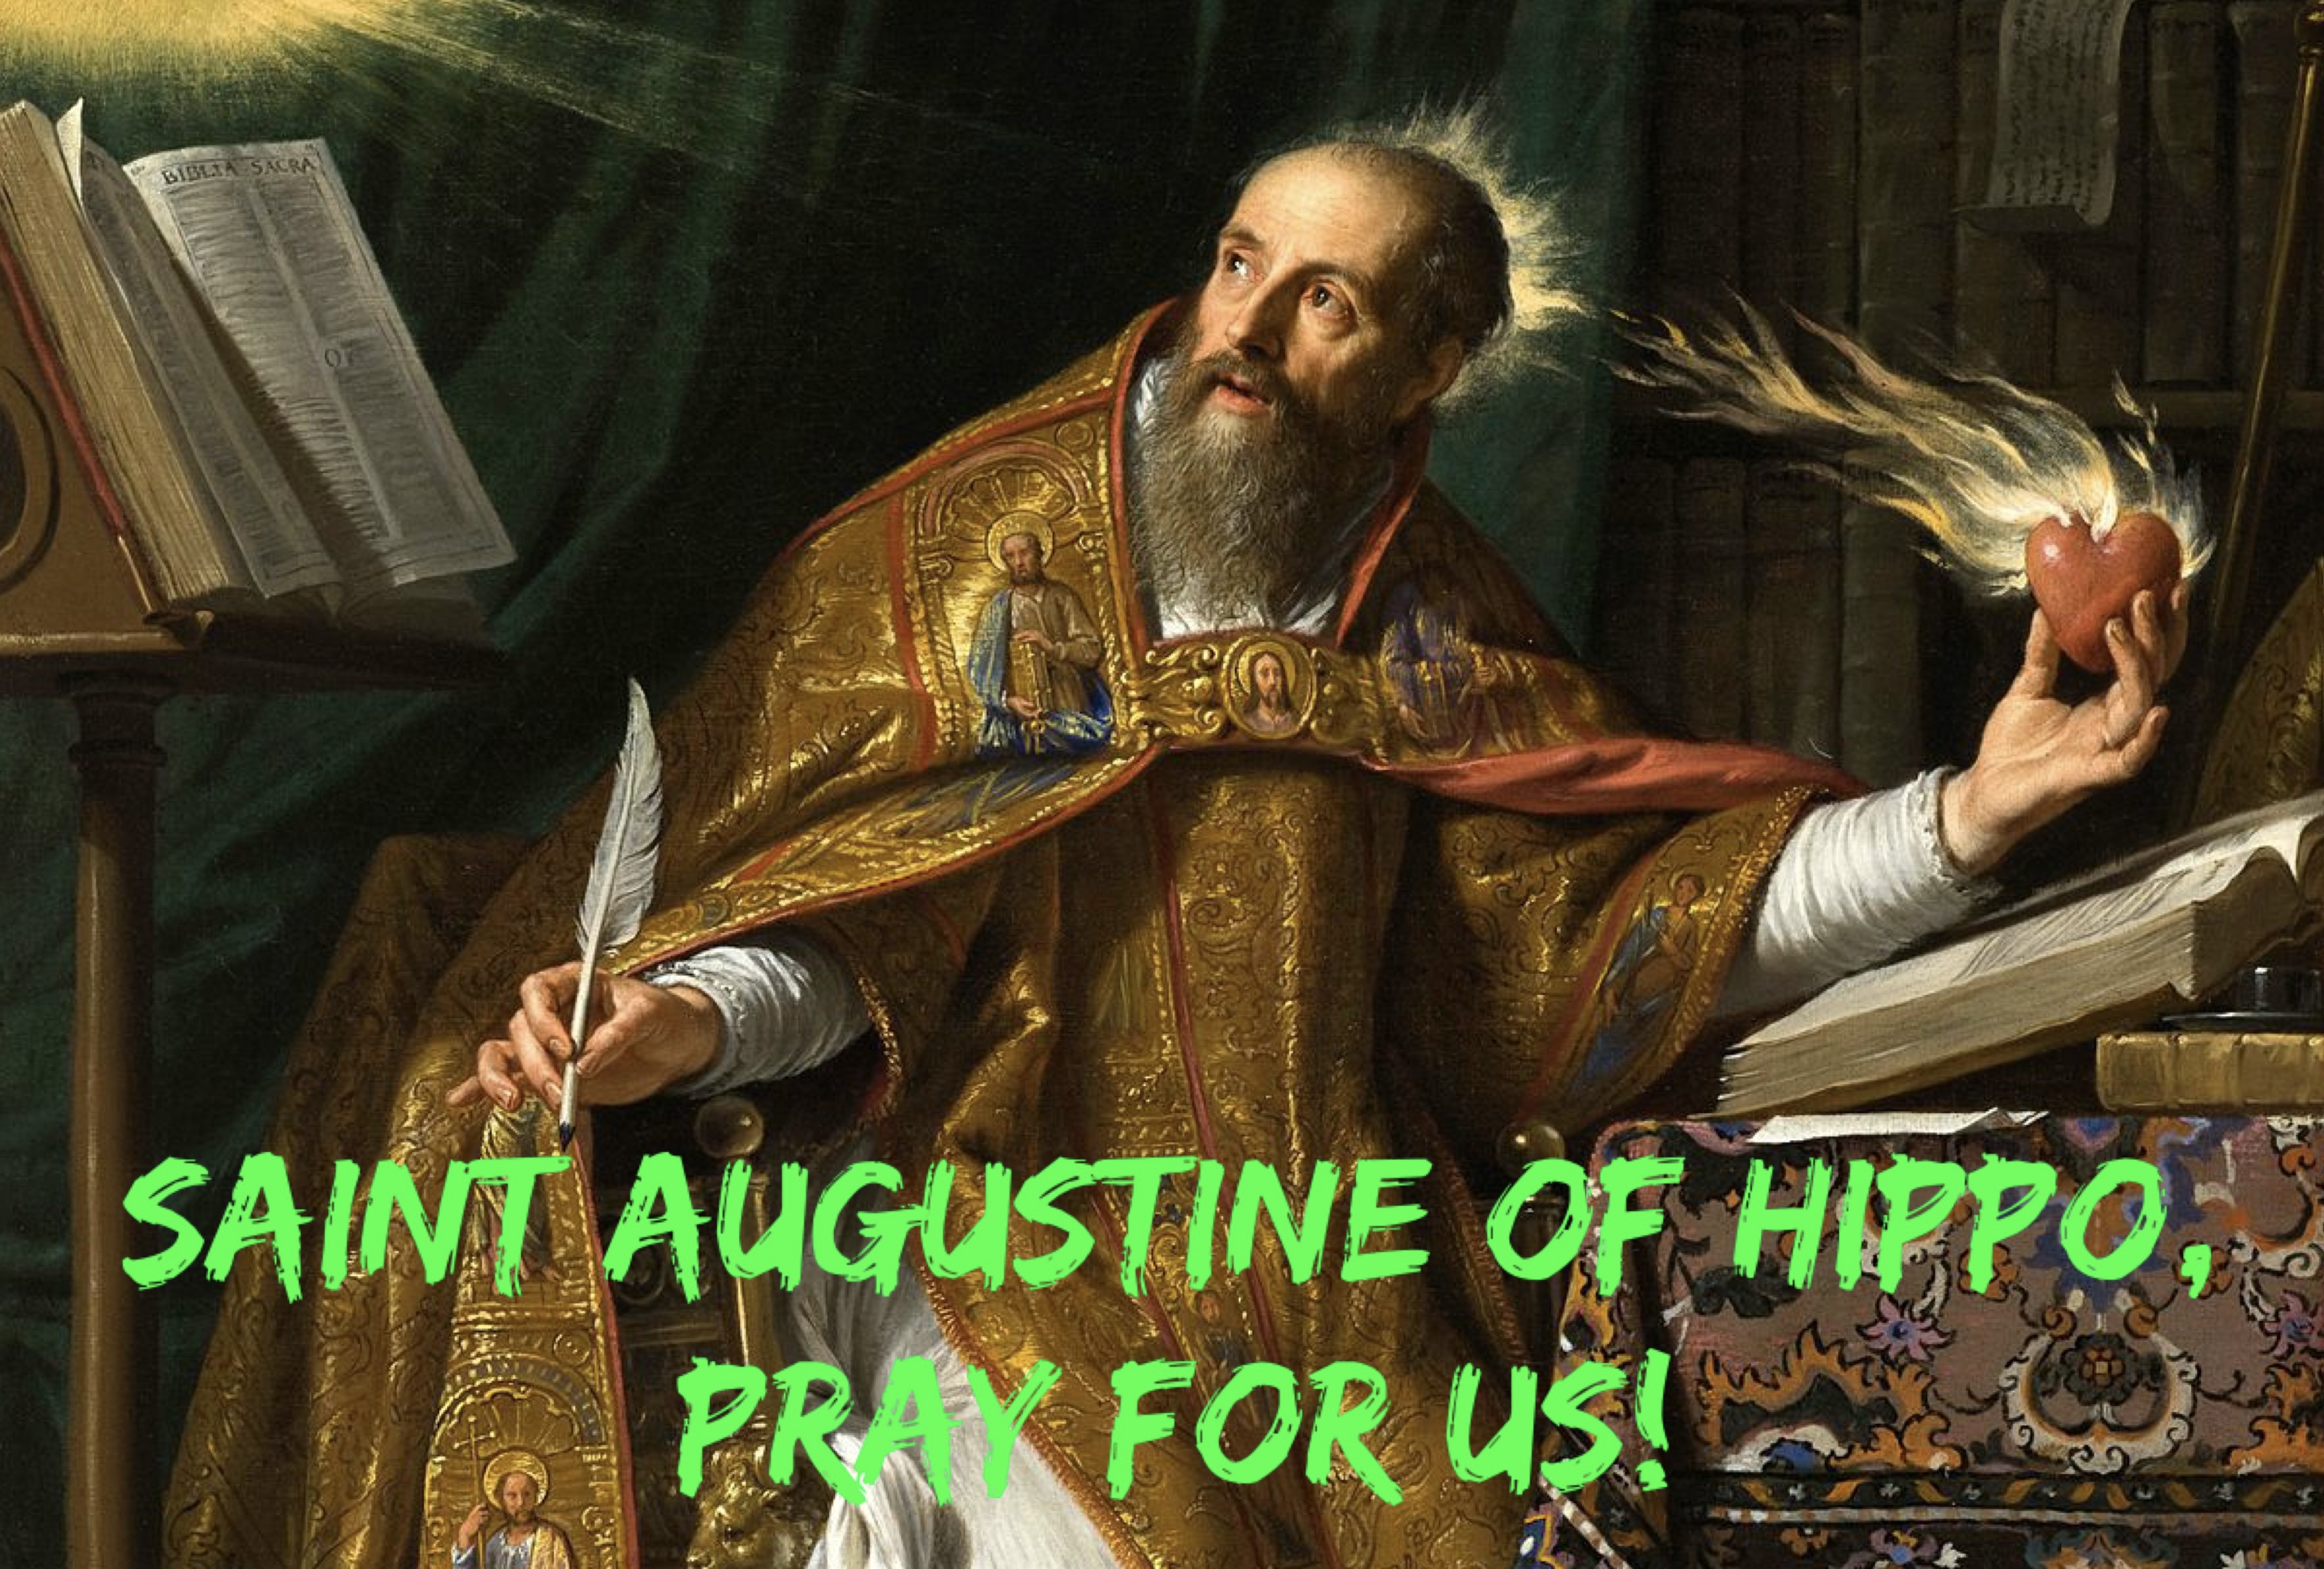 28th August - Saint Augustine of Hippo